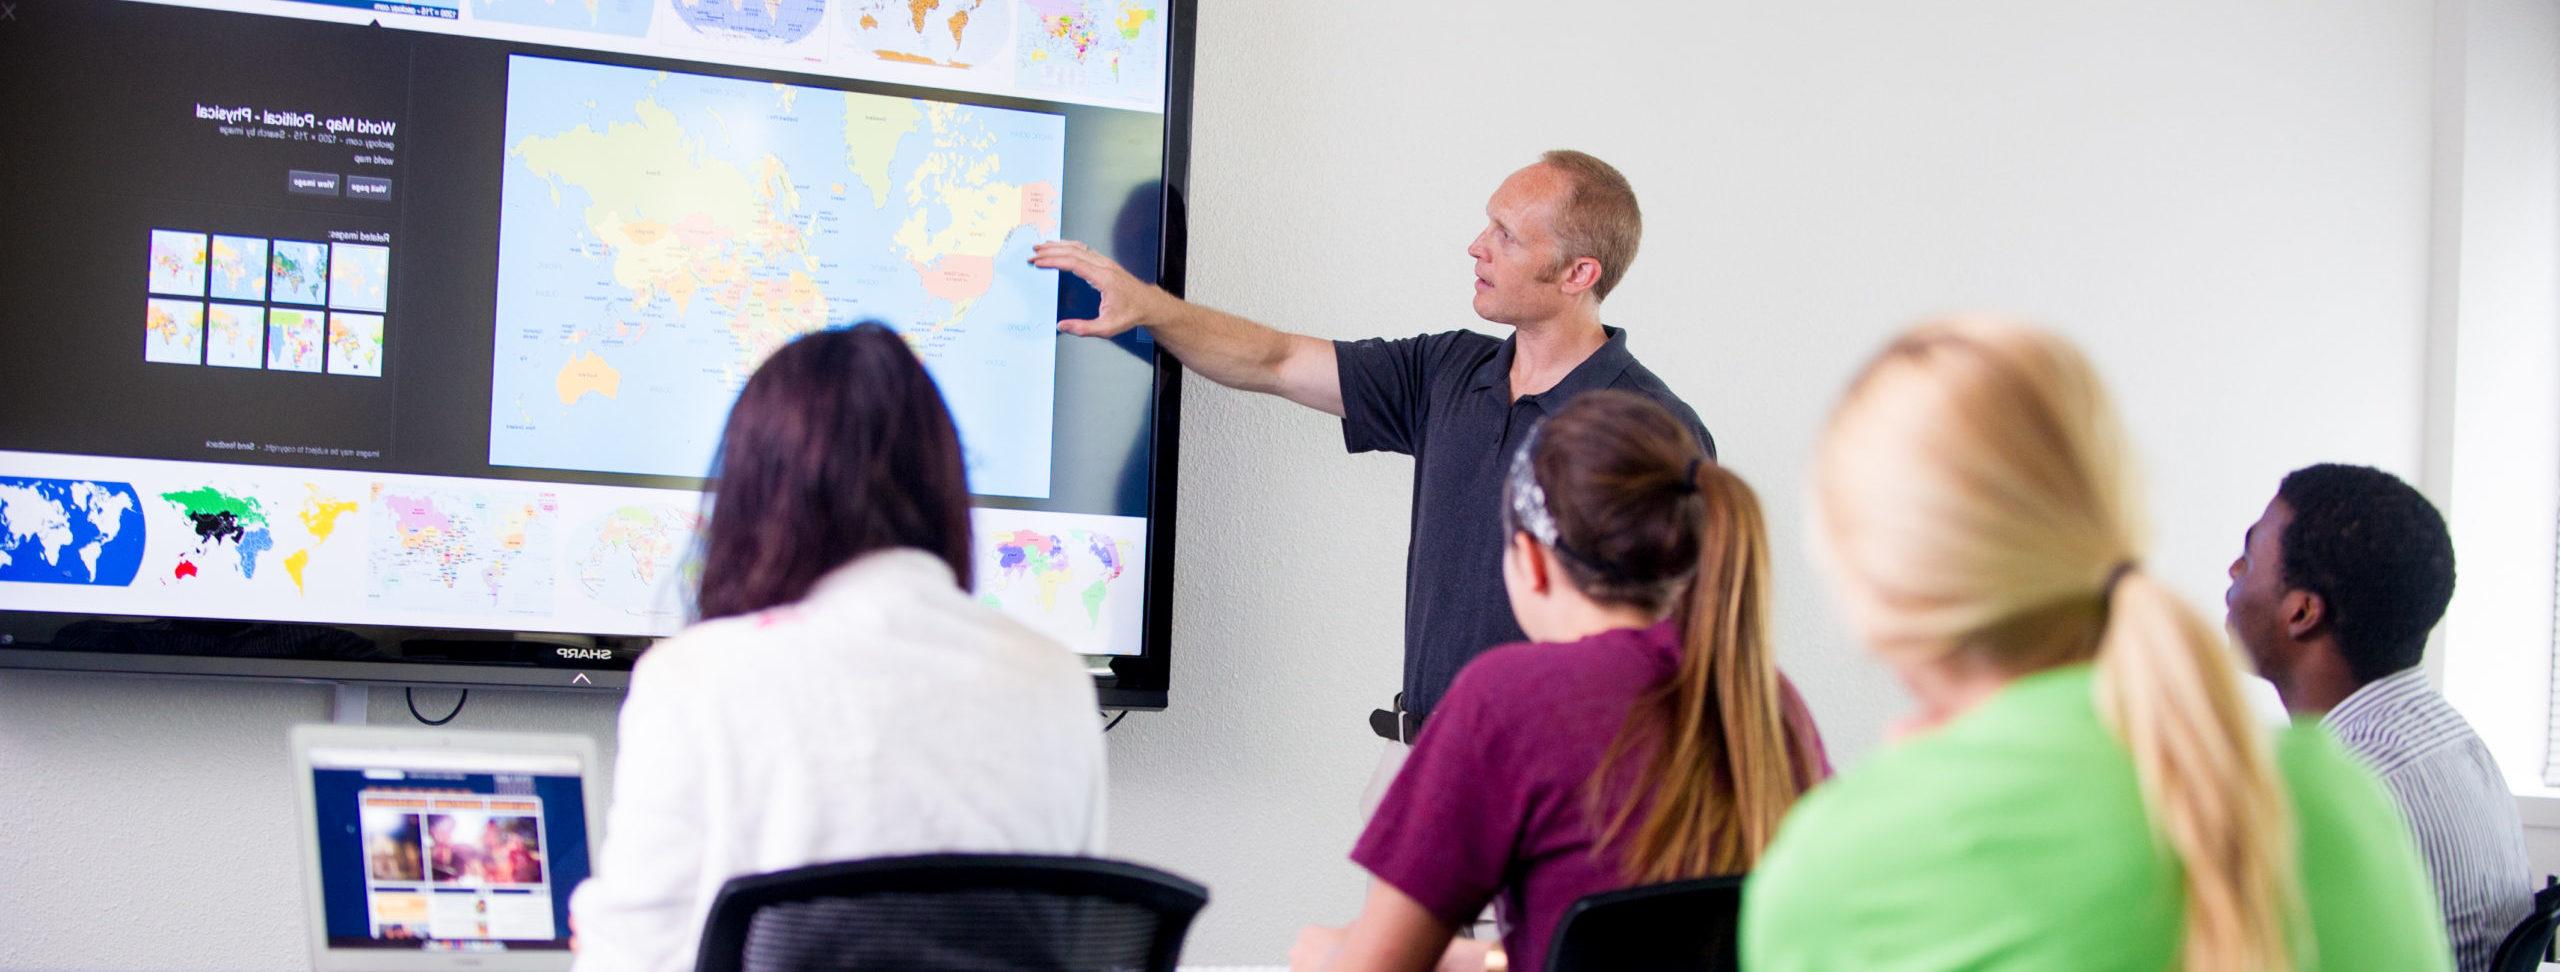 Man teaching students pointing to projector screen displaying world maps.